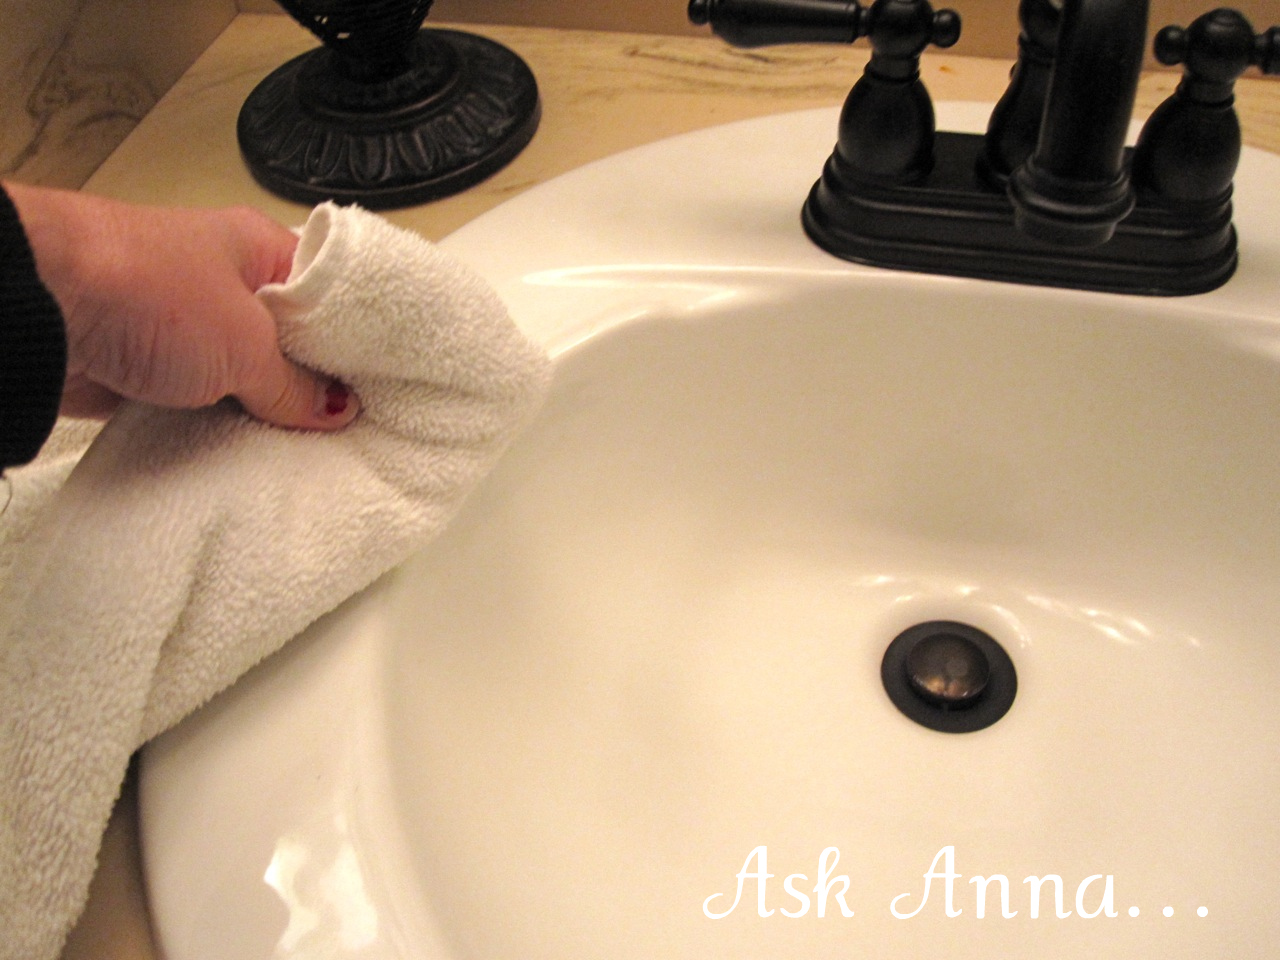 A Quick Tip For Cleaning Bathroom Sinks Ask Anna